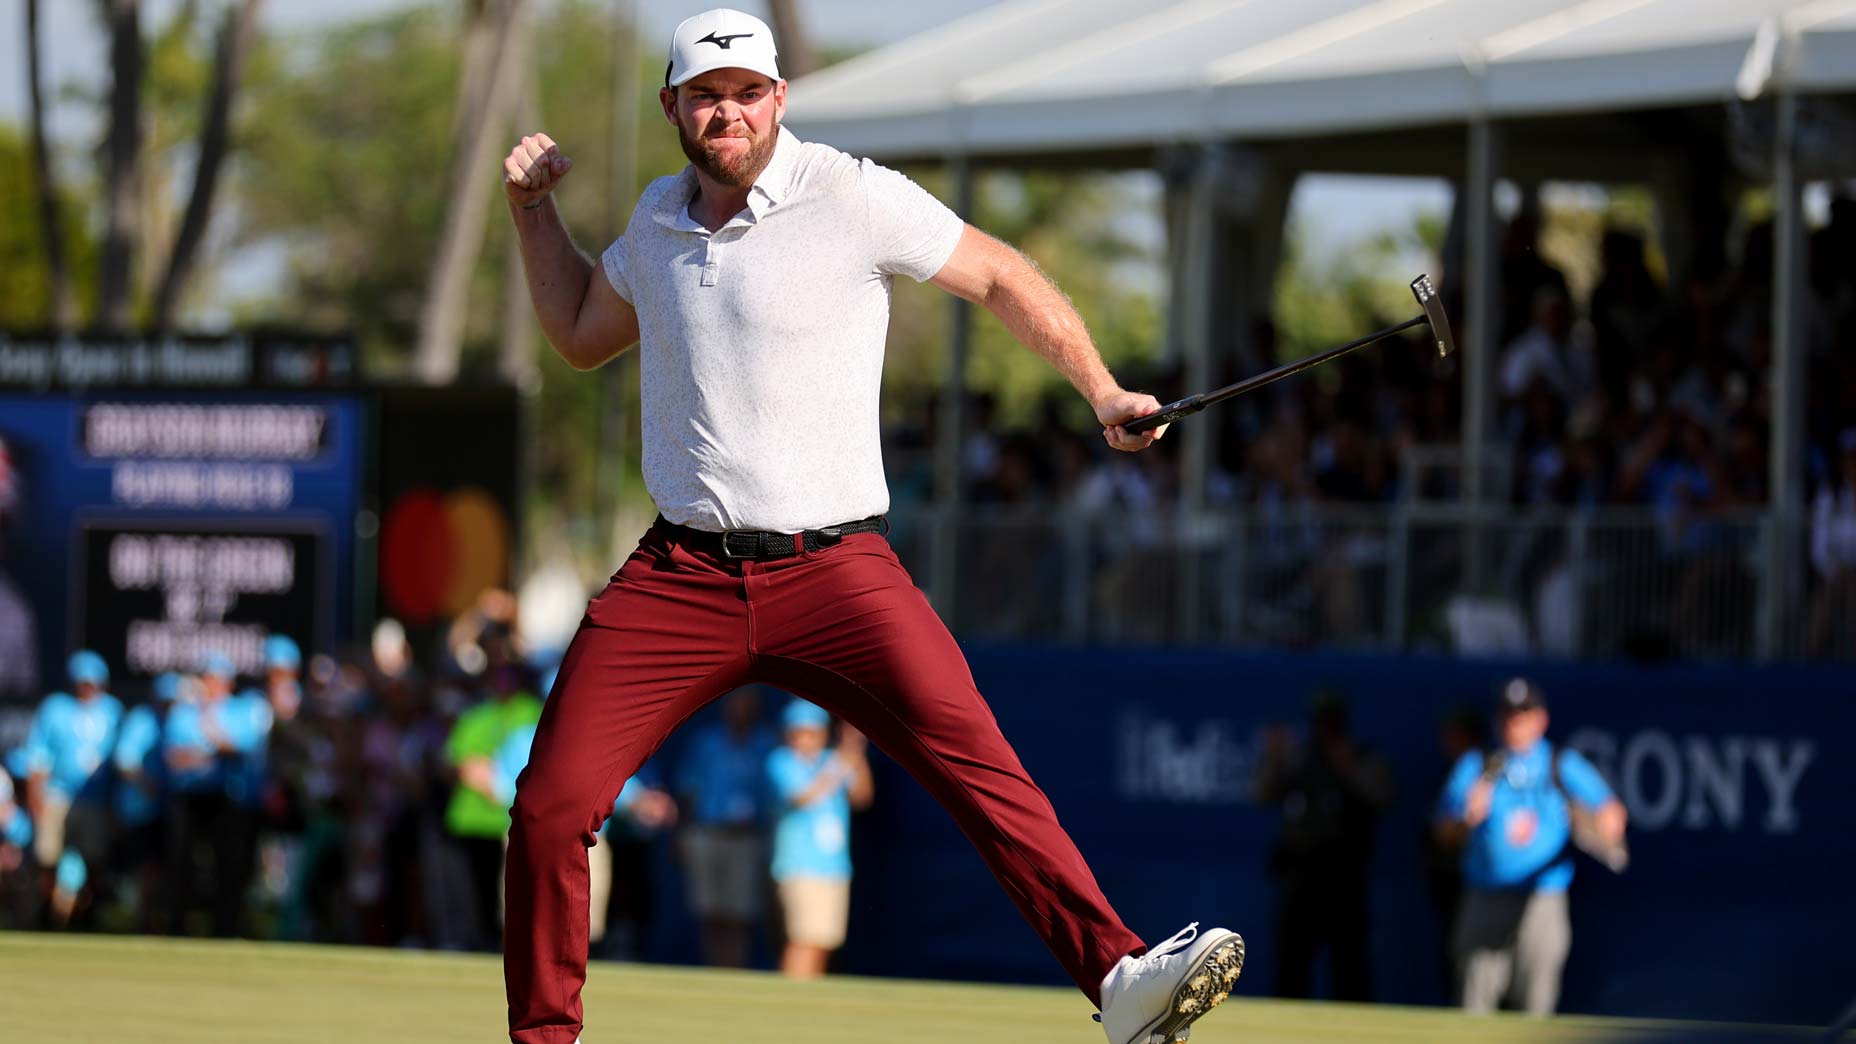 Grayson Murray playoff, personal struggles to win Sony Open